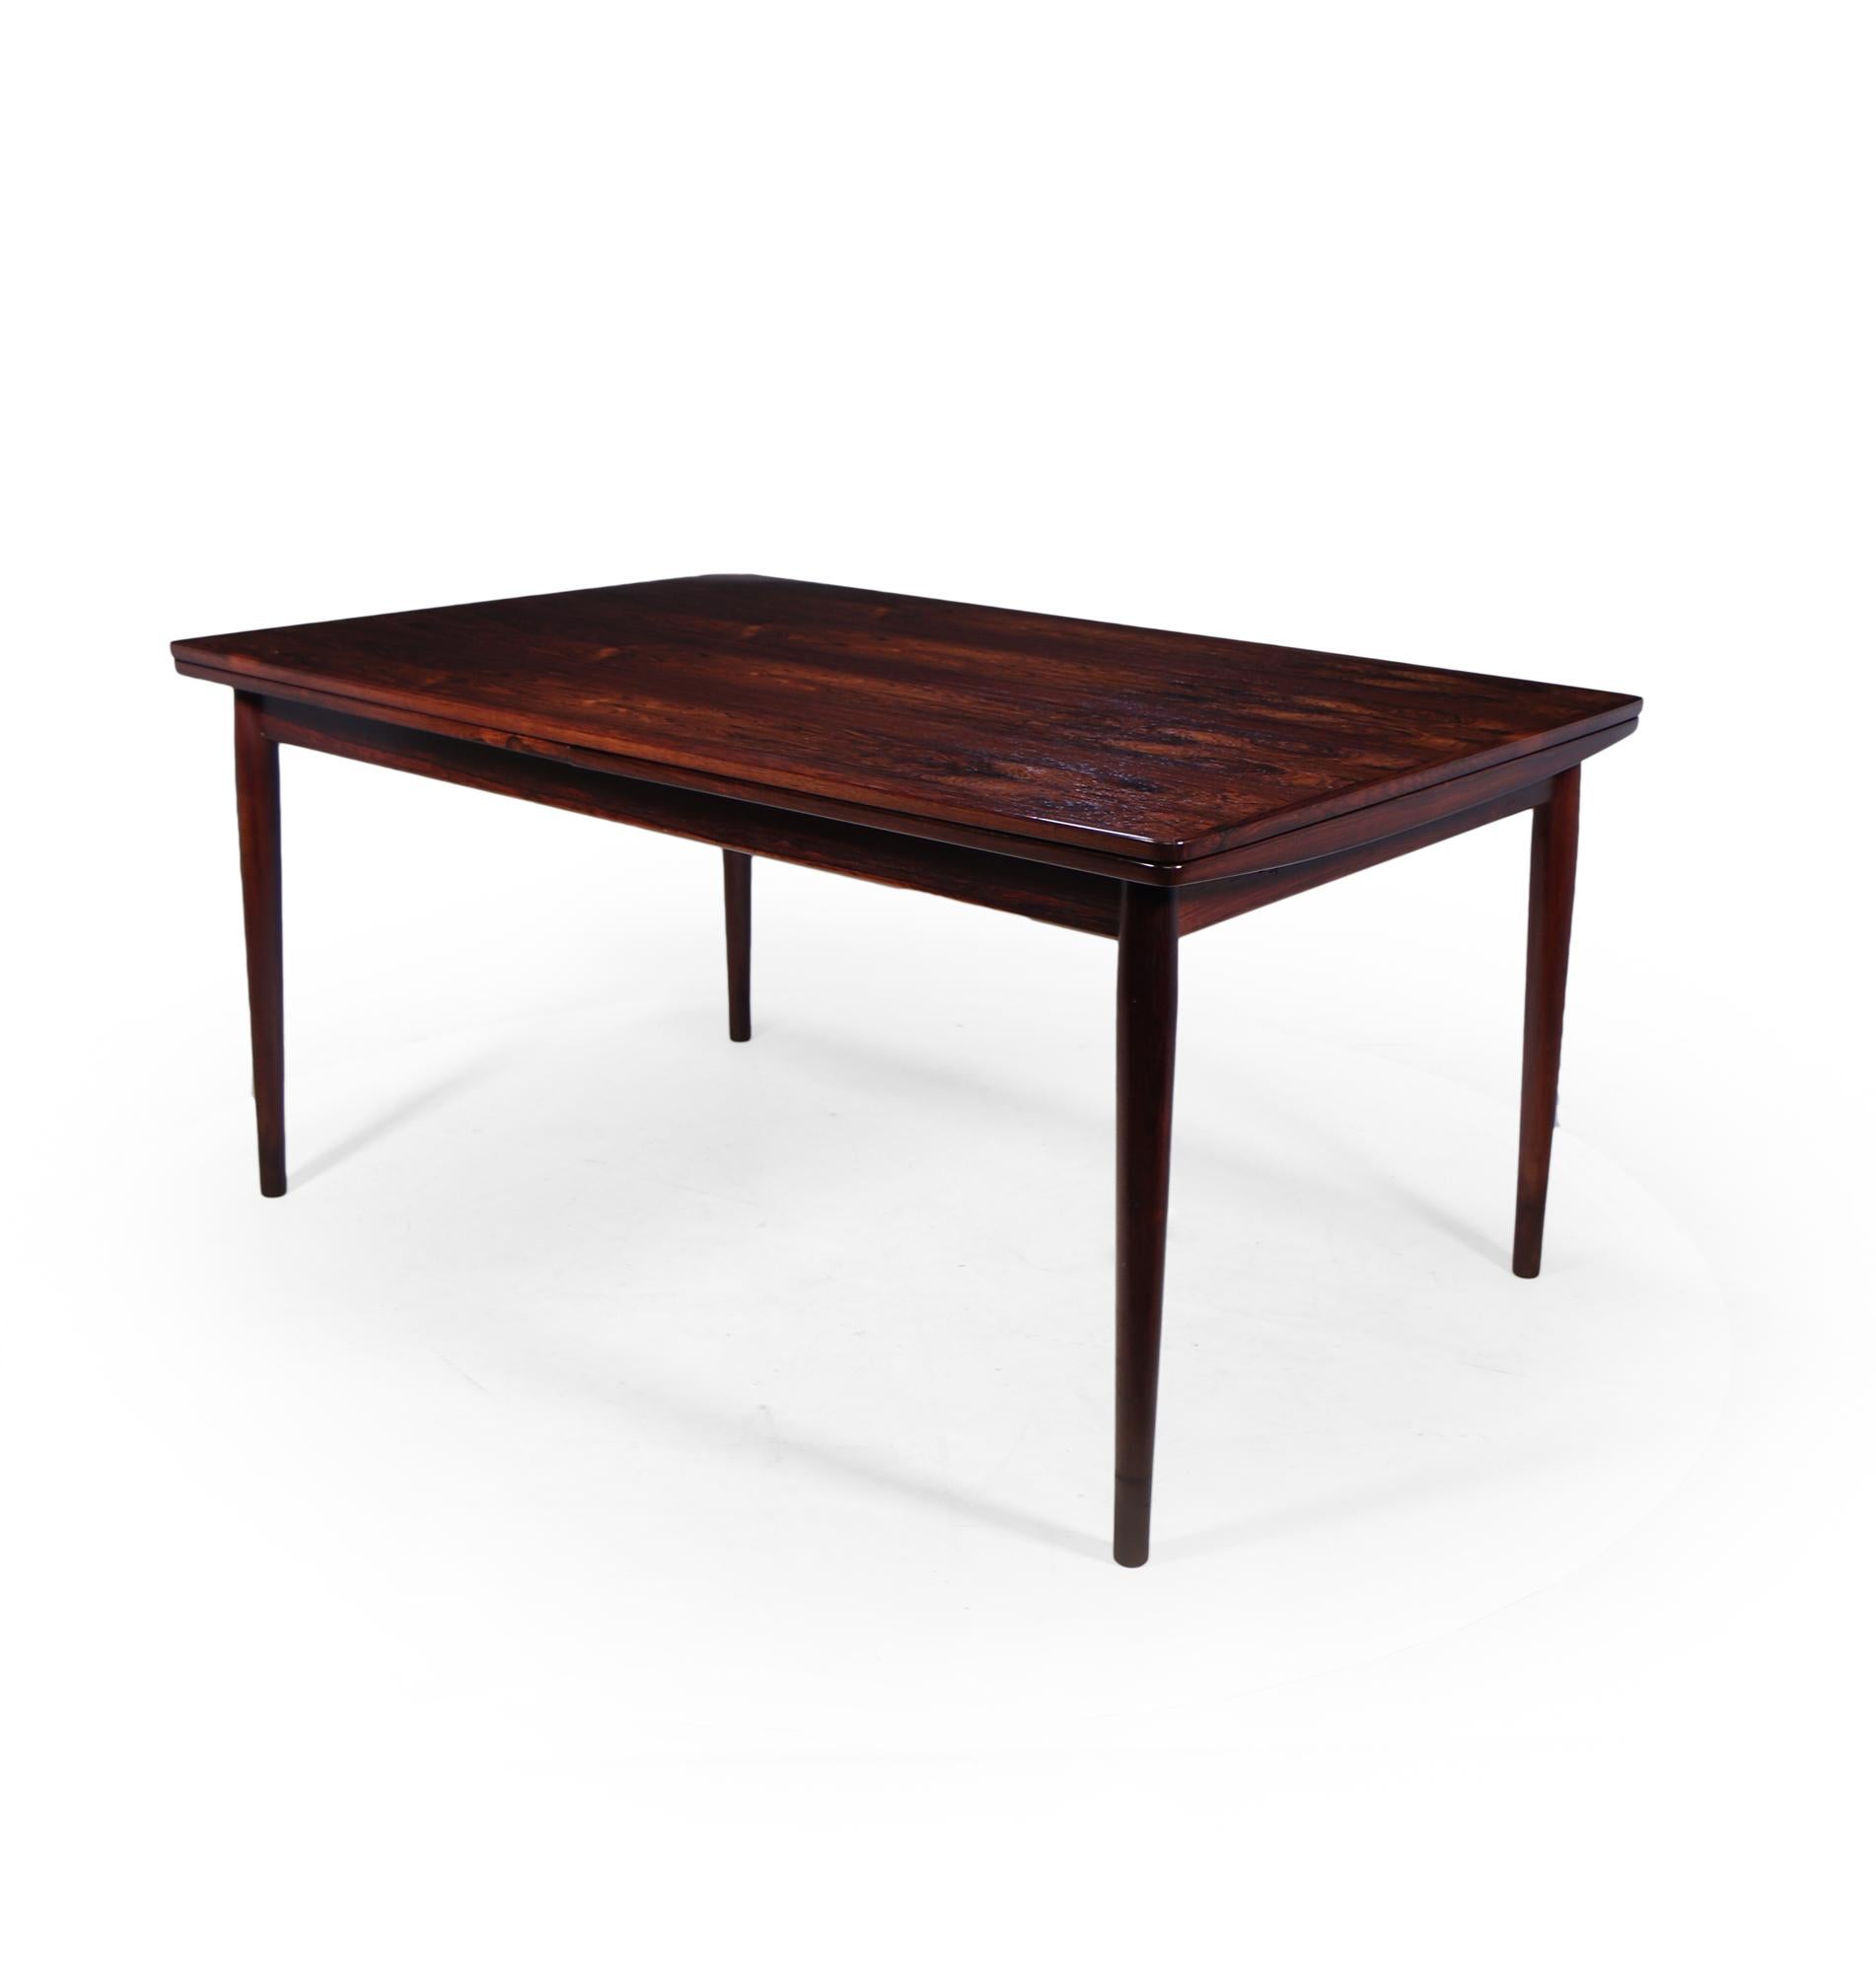 A stunning quality mid century dining table designed by Arne Vodder and produced by Sibast in Denmark in the 1950’s, this is the large version of the two sizes that were produced it starts as square seating 6 and extends to seat max 10.

the